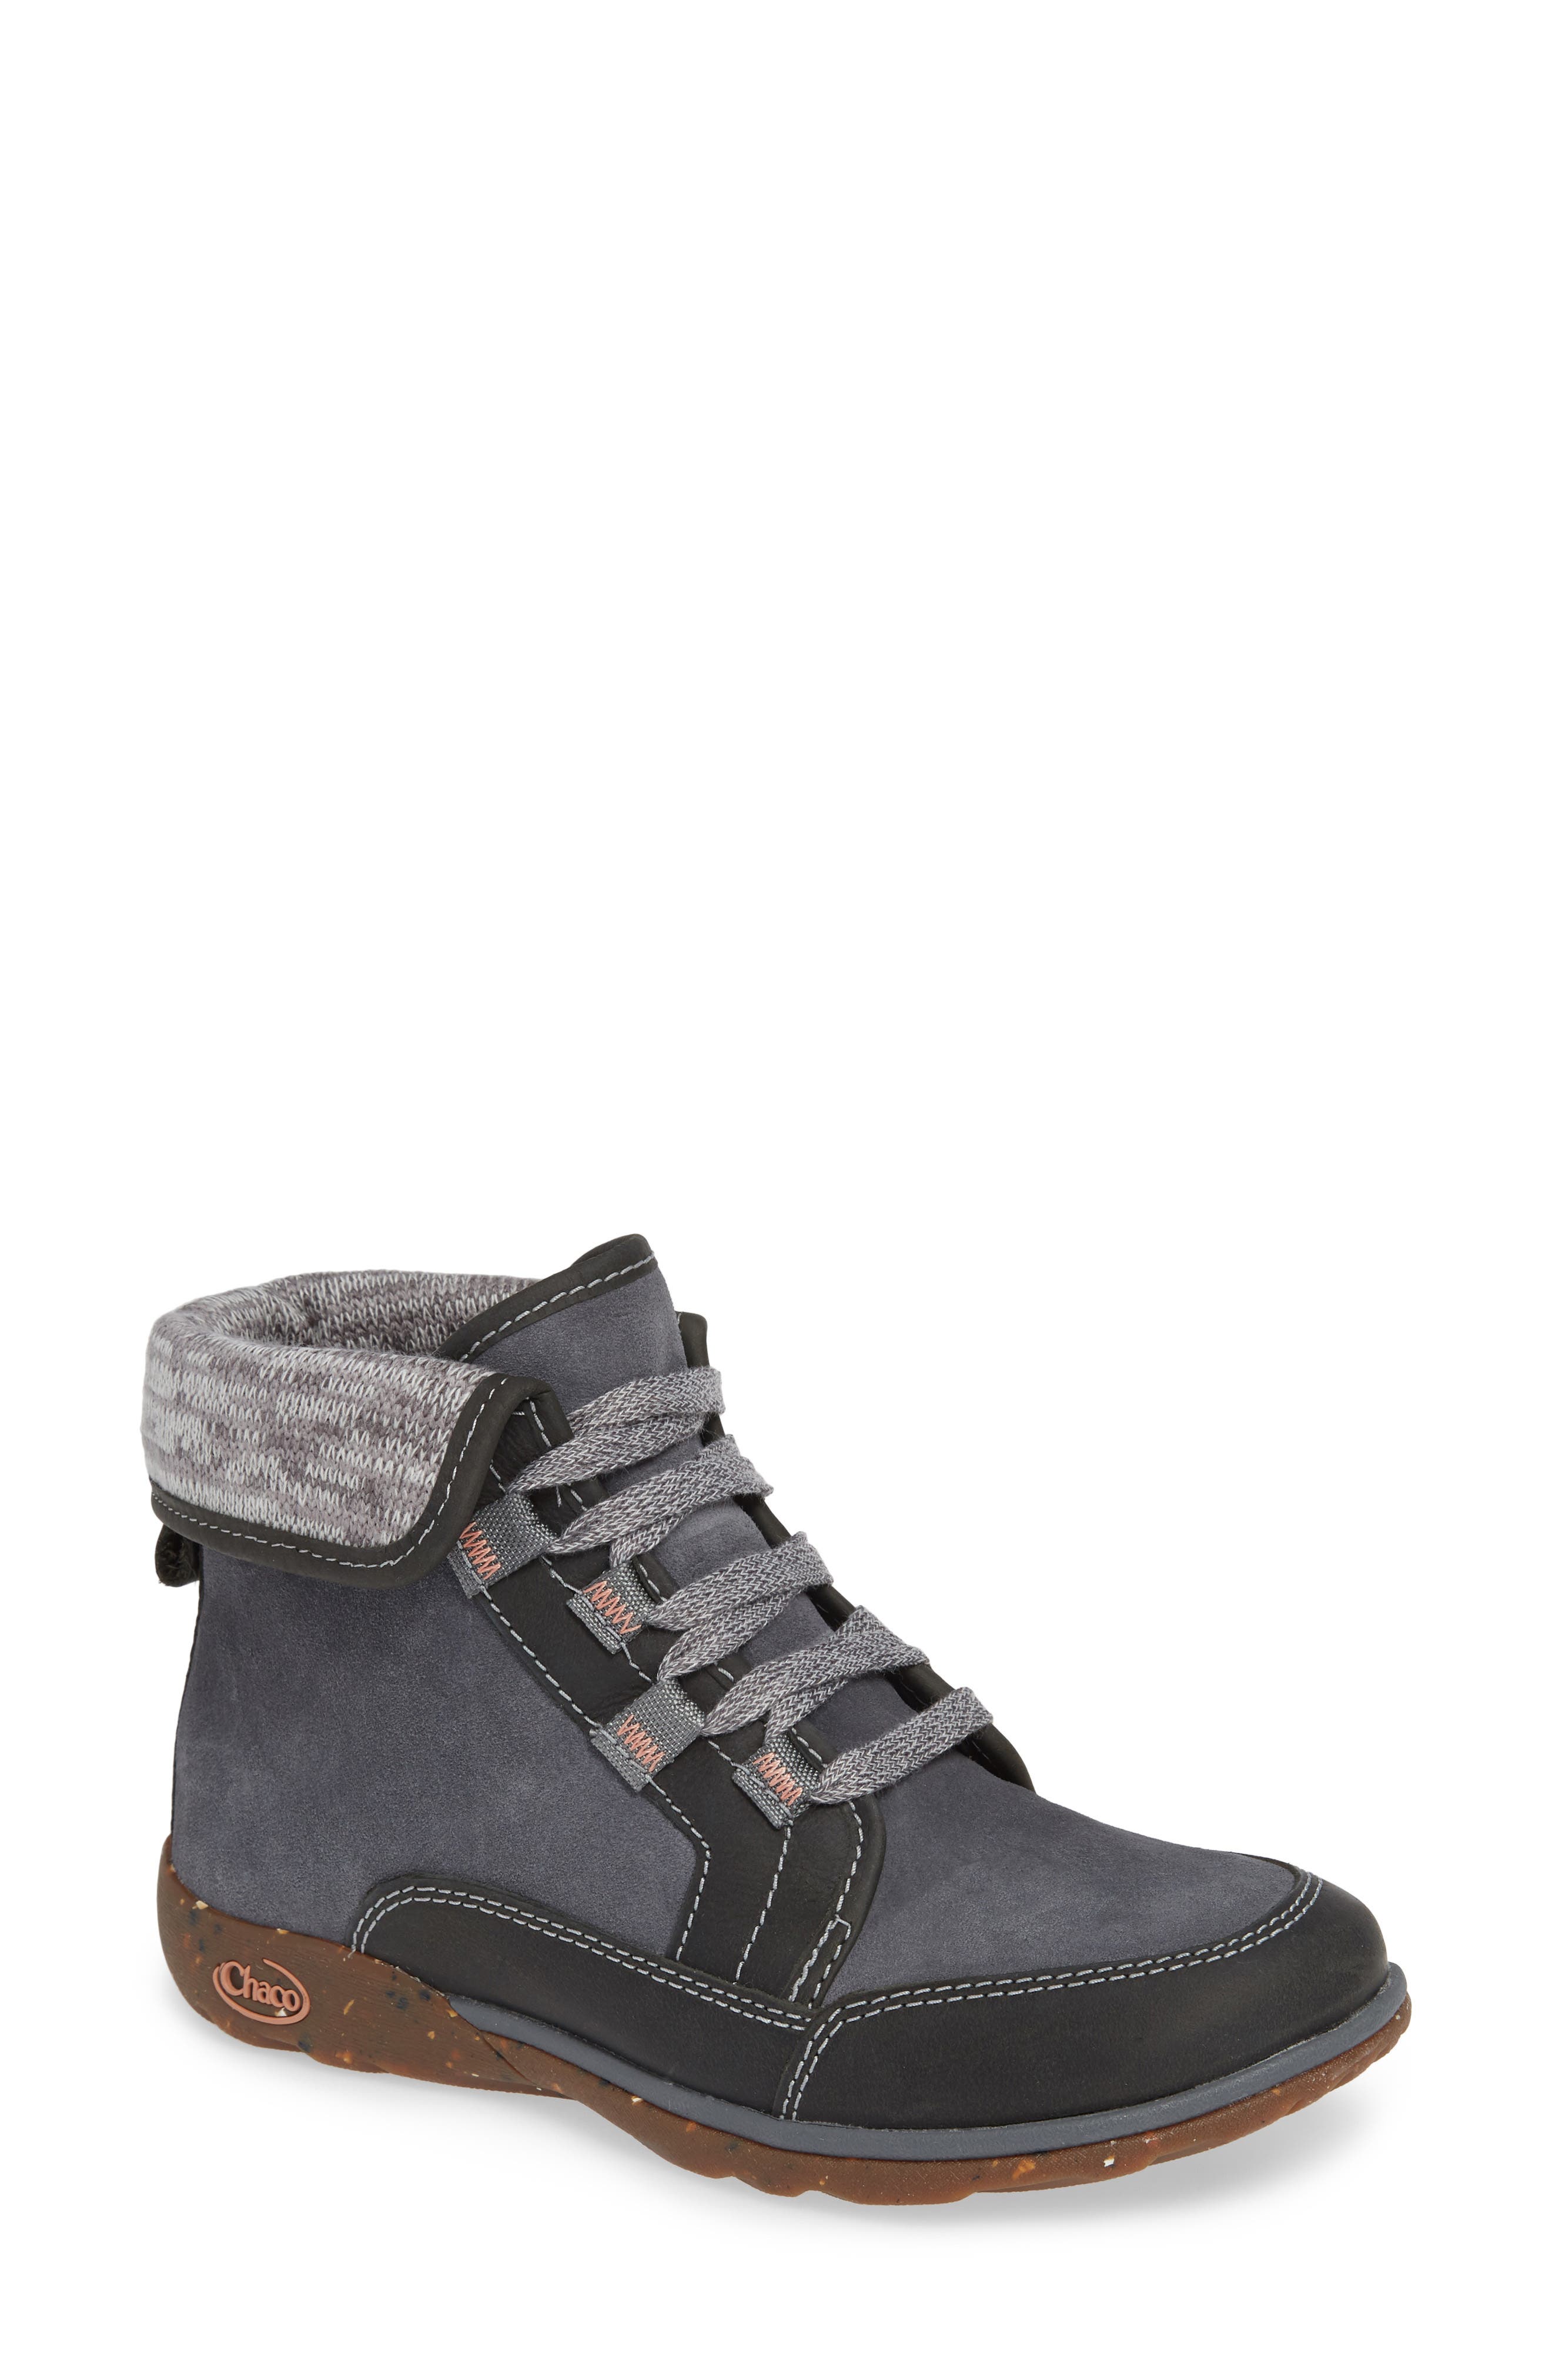 chaco ankle boots